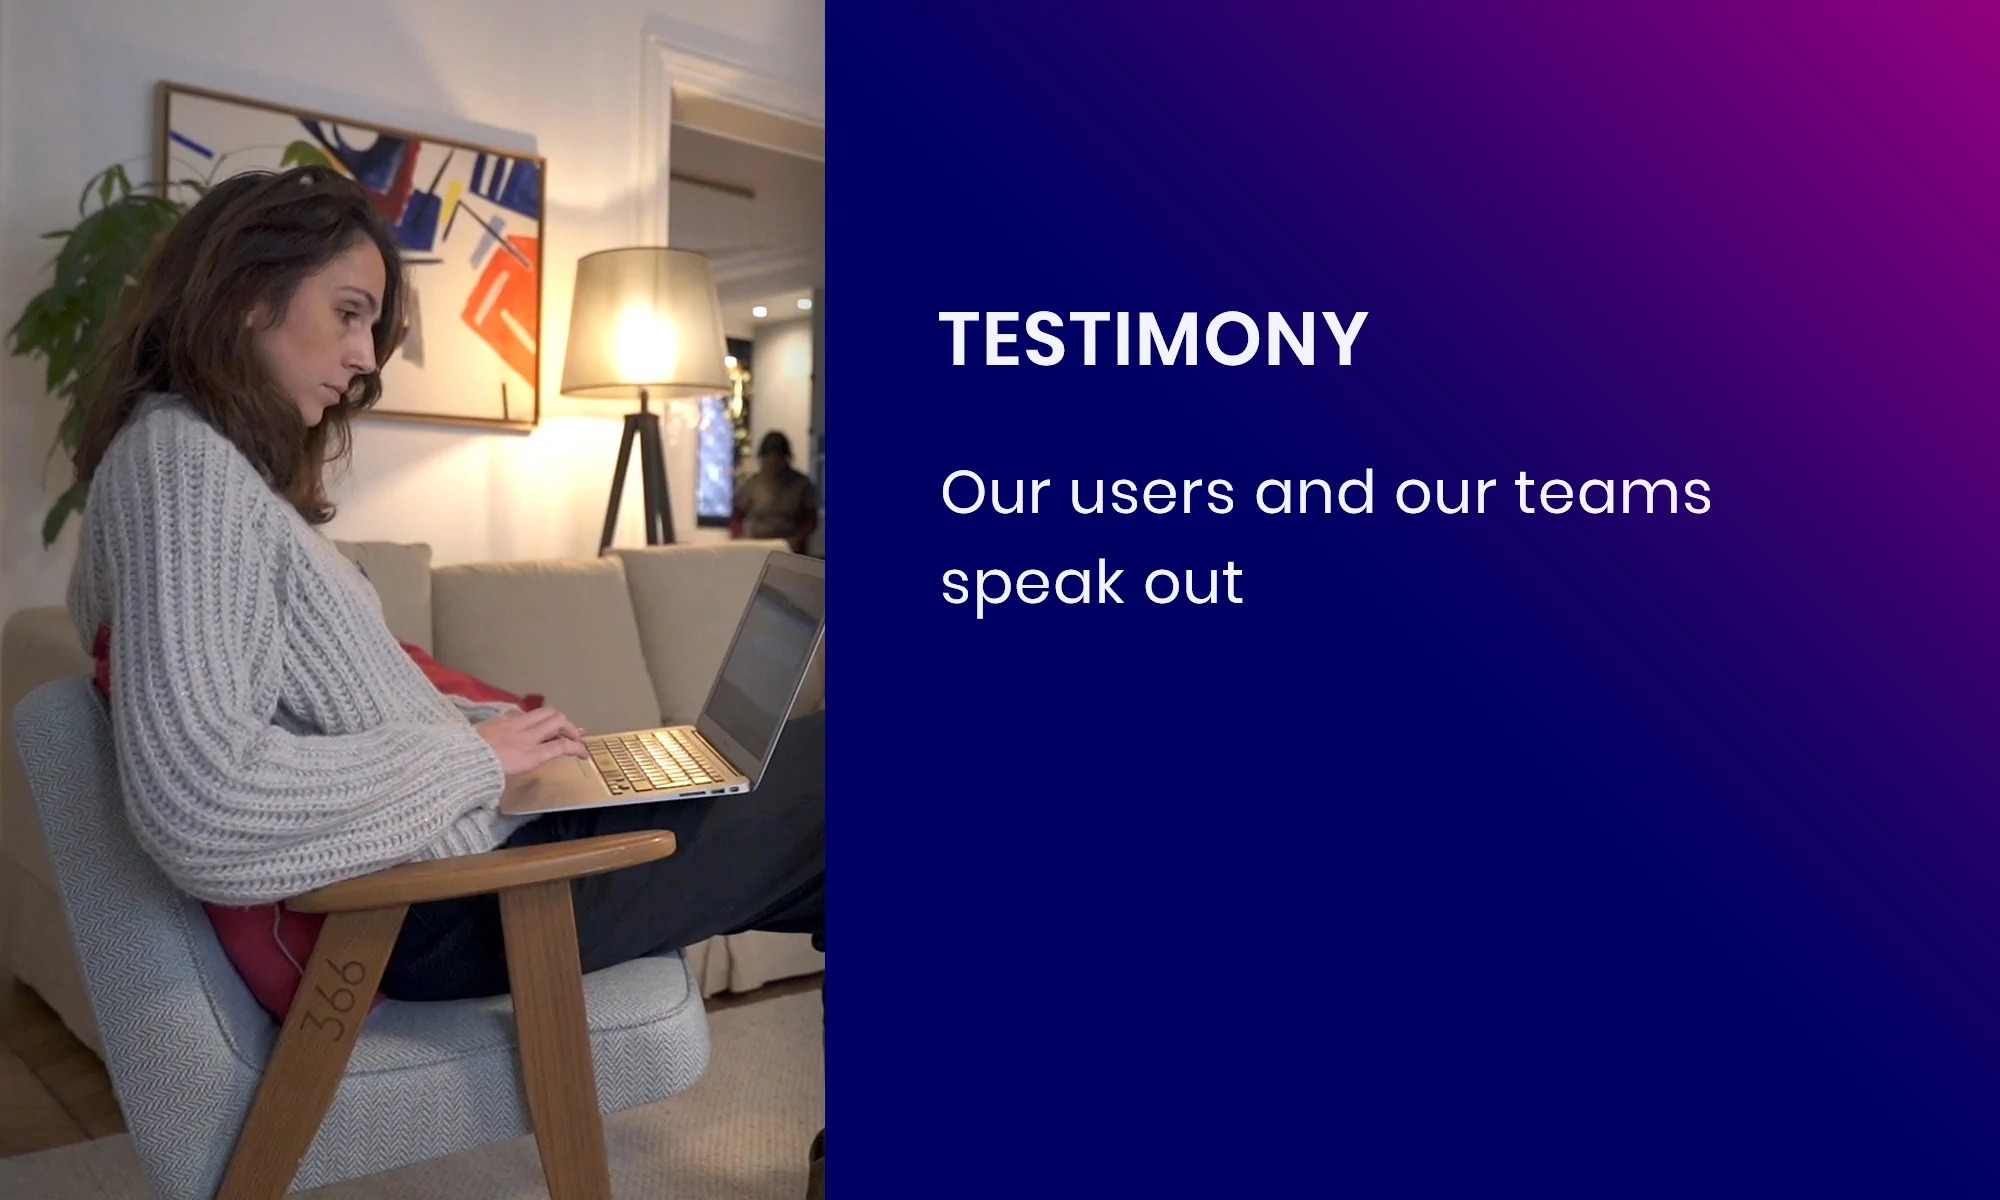 Testimony - Concilio users and teams speak out